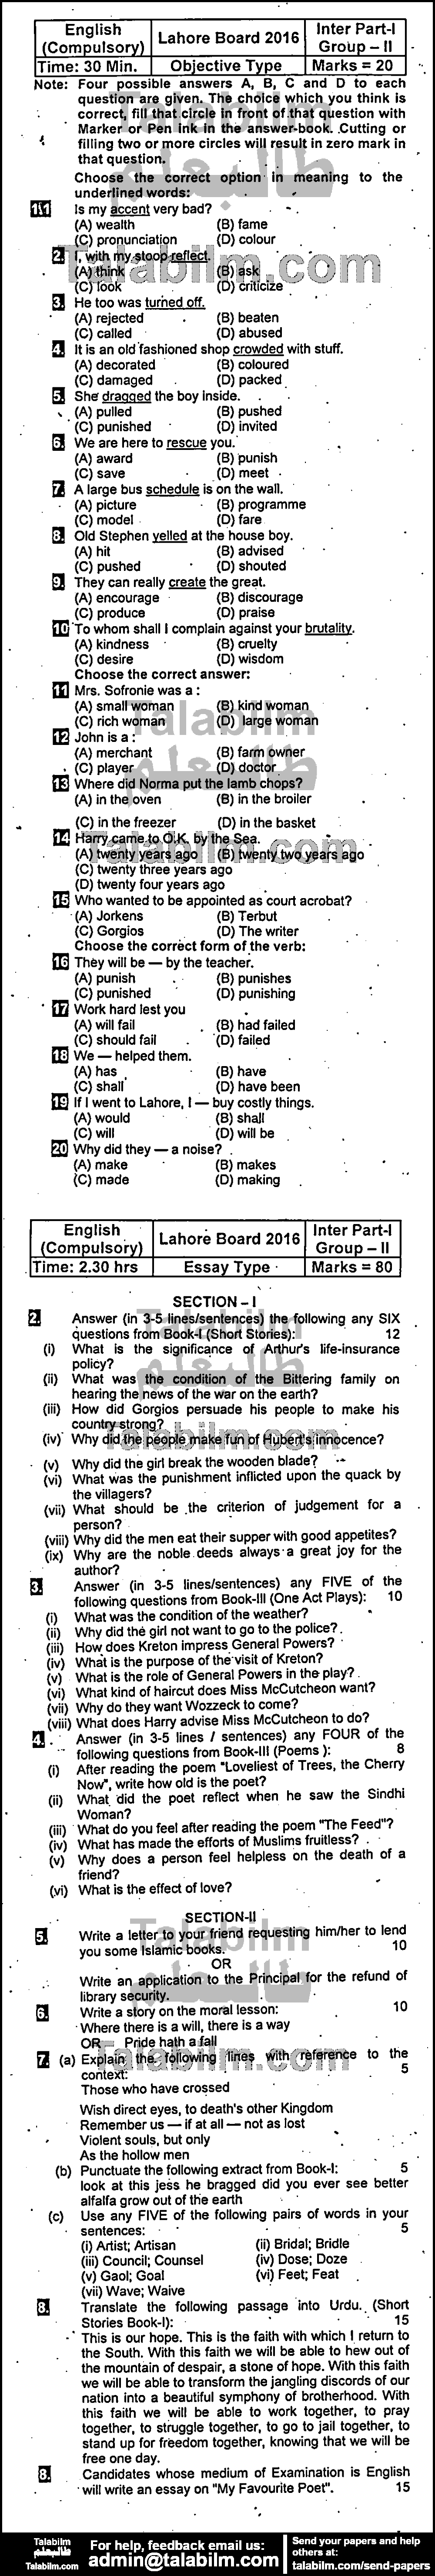 English 0 past paper for Group-II 2016